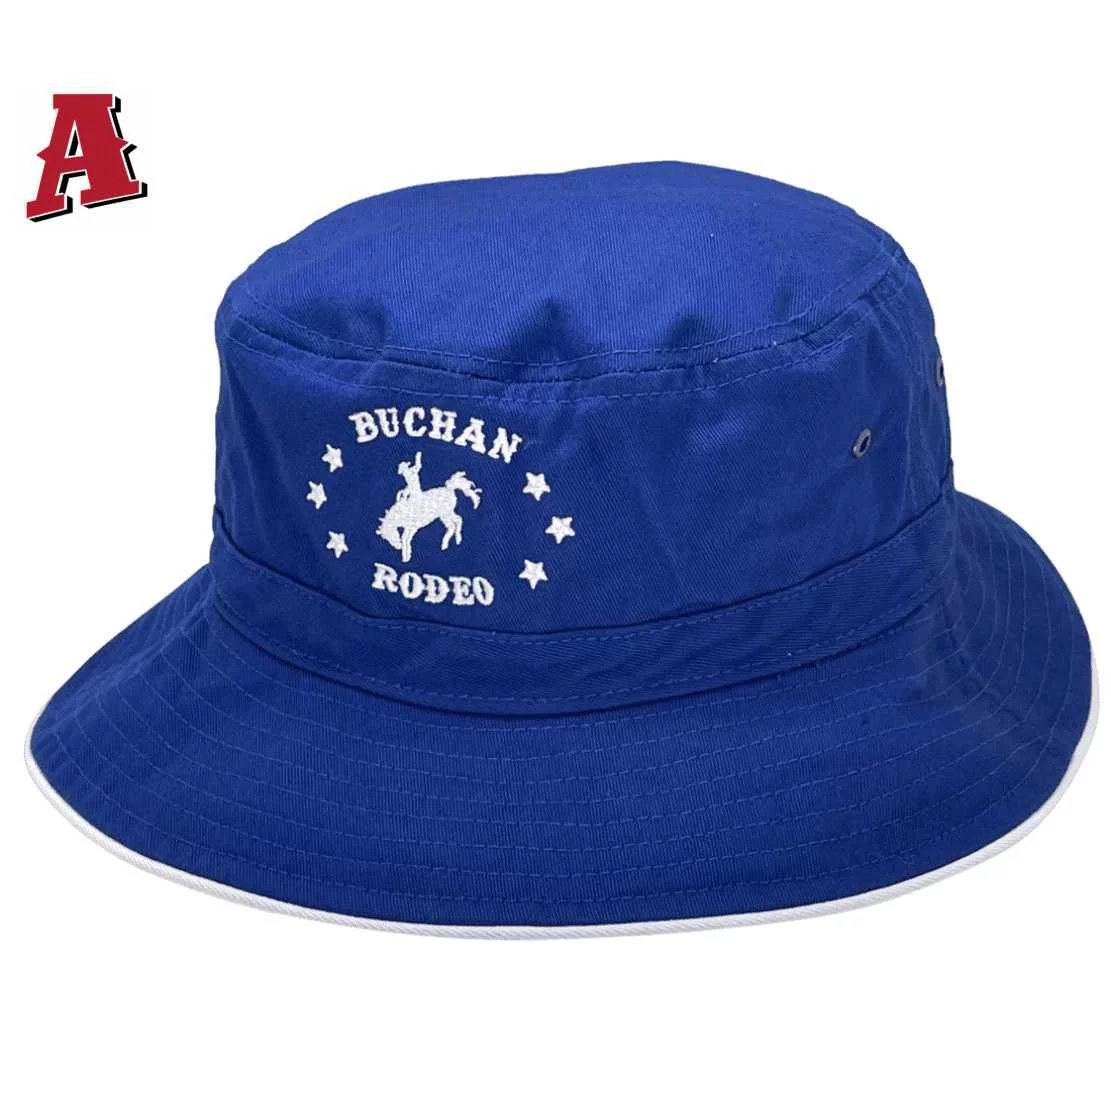 Buchan Rodeo Buchan South VIC Aussie Trucker Hats One Size Fits All with Optional Adjustable Brim Size 5cm to 7.5cm Width -Royal Blue